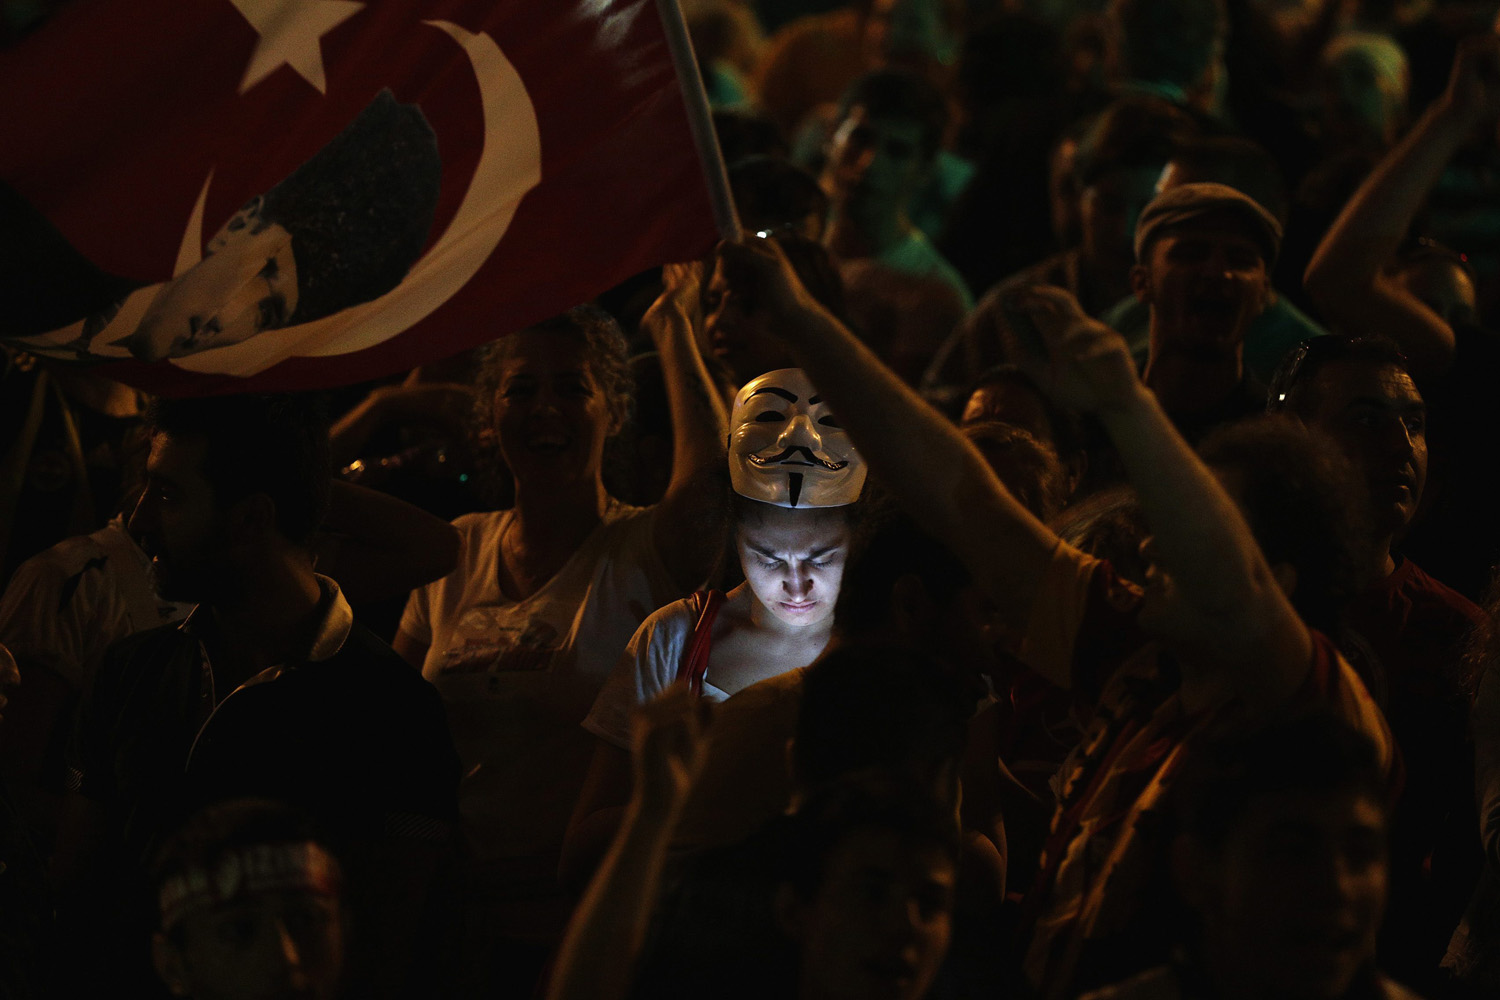 A protester uses her mobile phone during a demonstration at Taksim Square in Istanbul